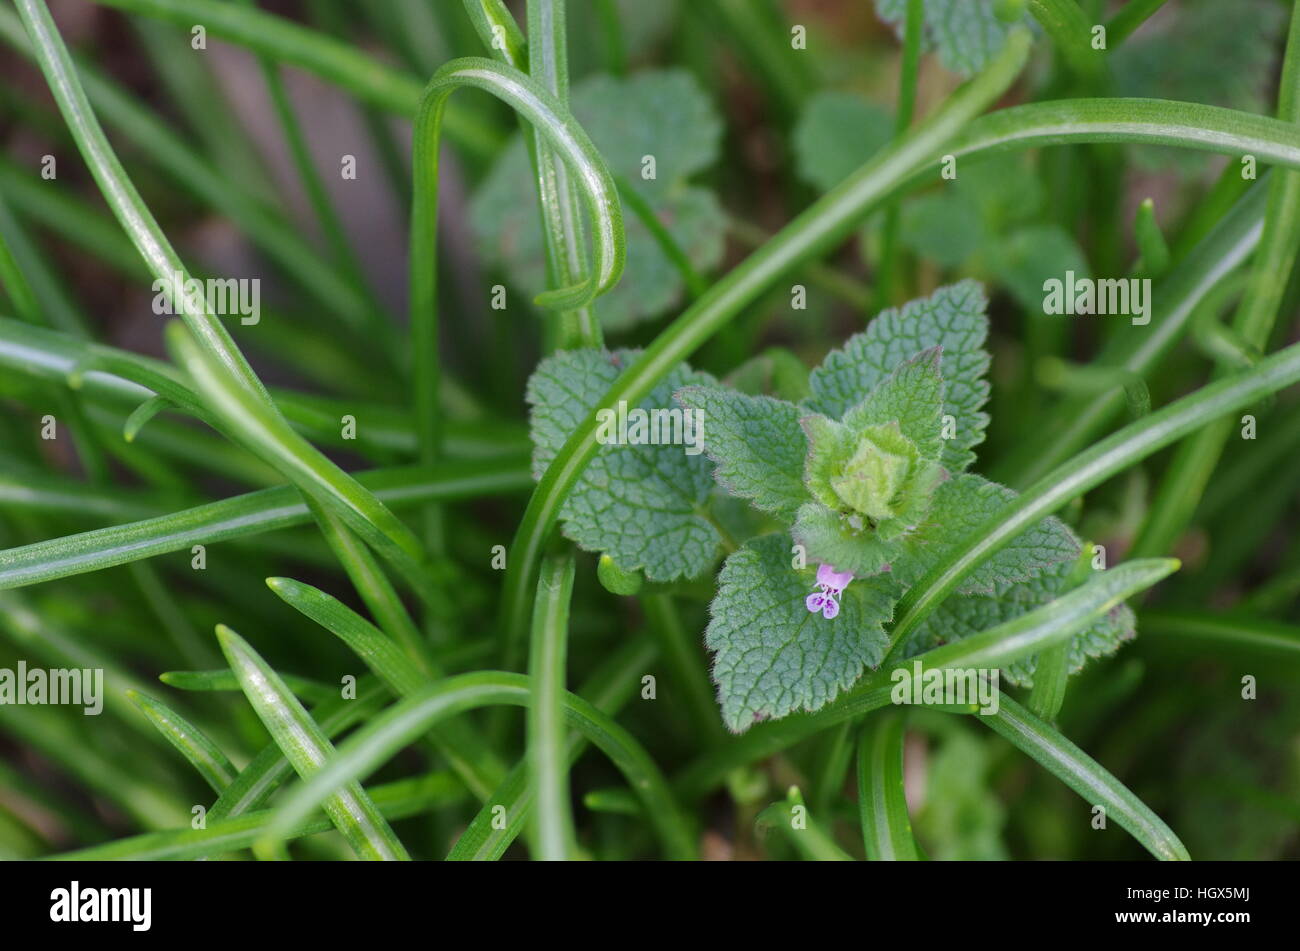 Bright green leaf bloom with tiny purple flower peeking out surrounded by thin blades of light and dark green grass Stock Photo